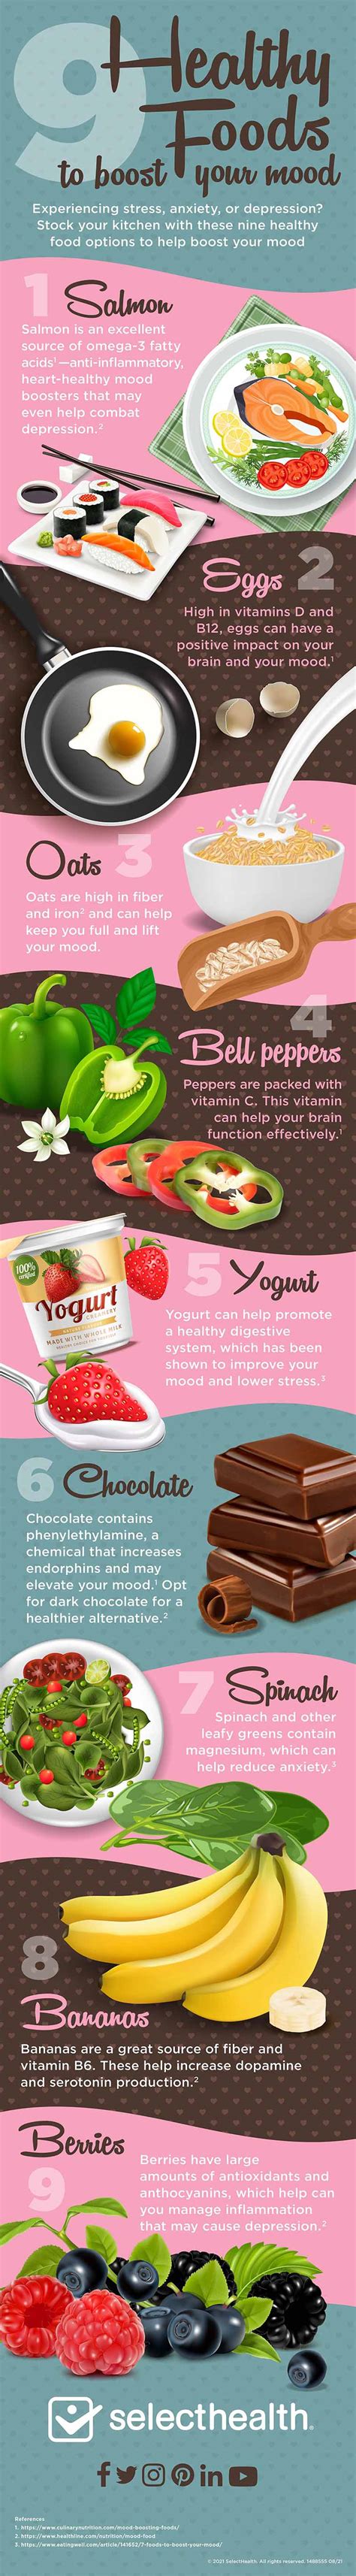 Healthy Foods To Boost Your Mood Infographic